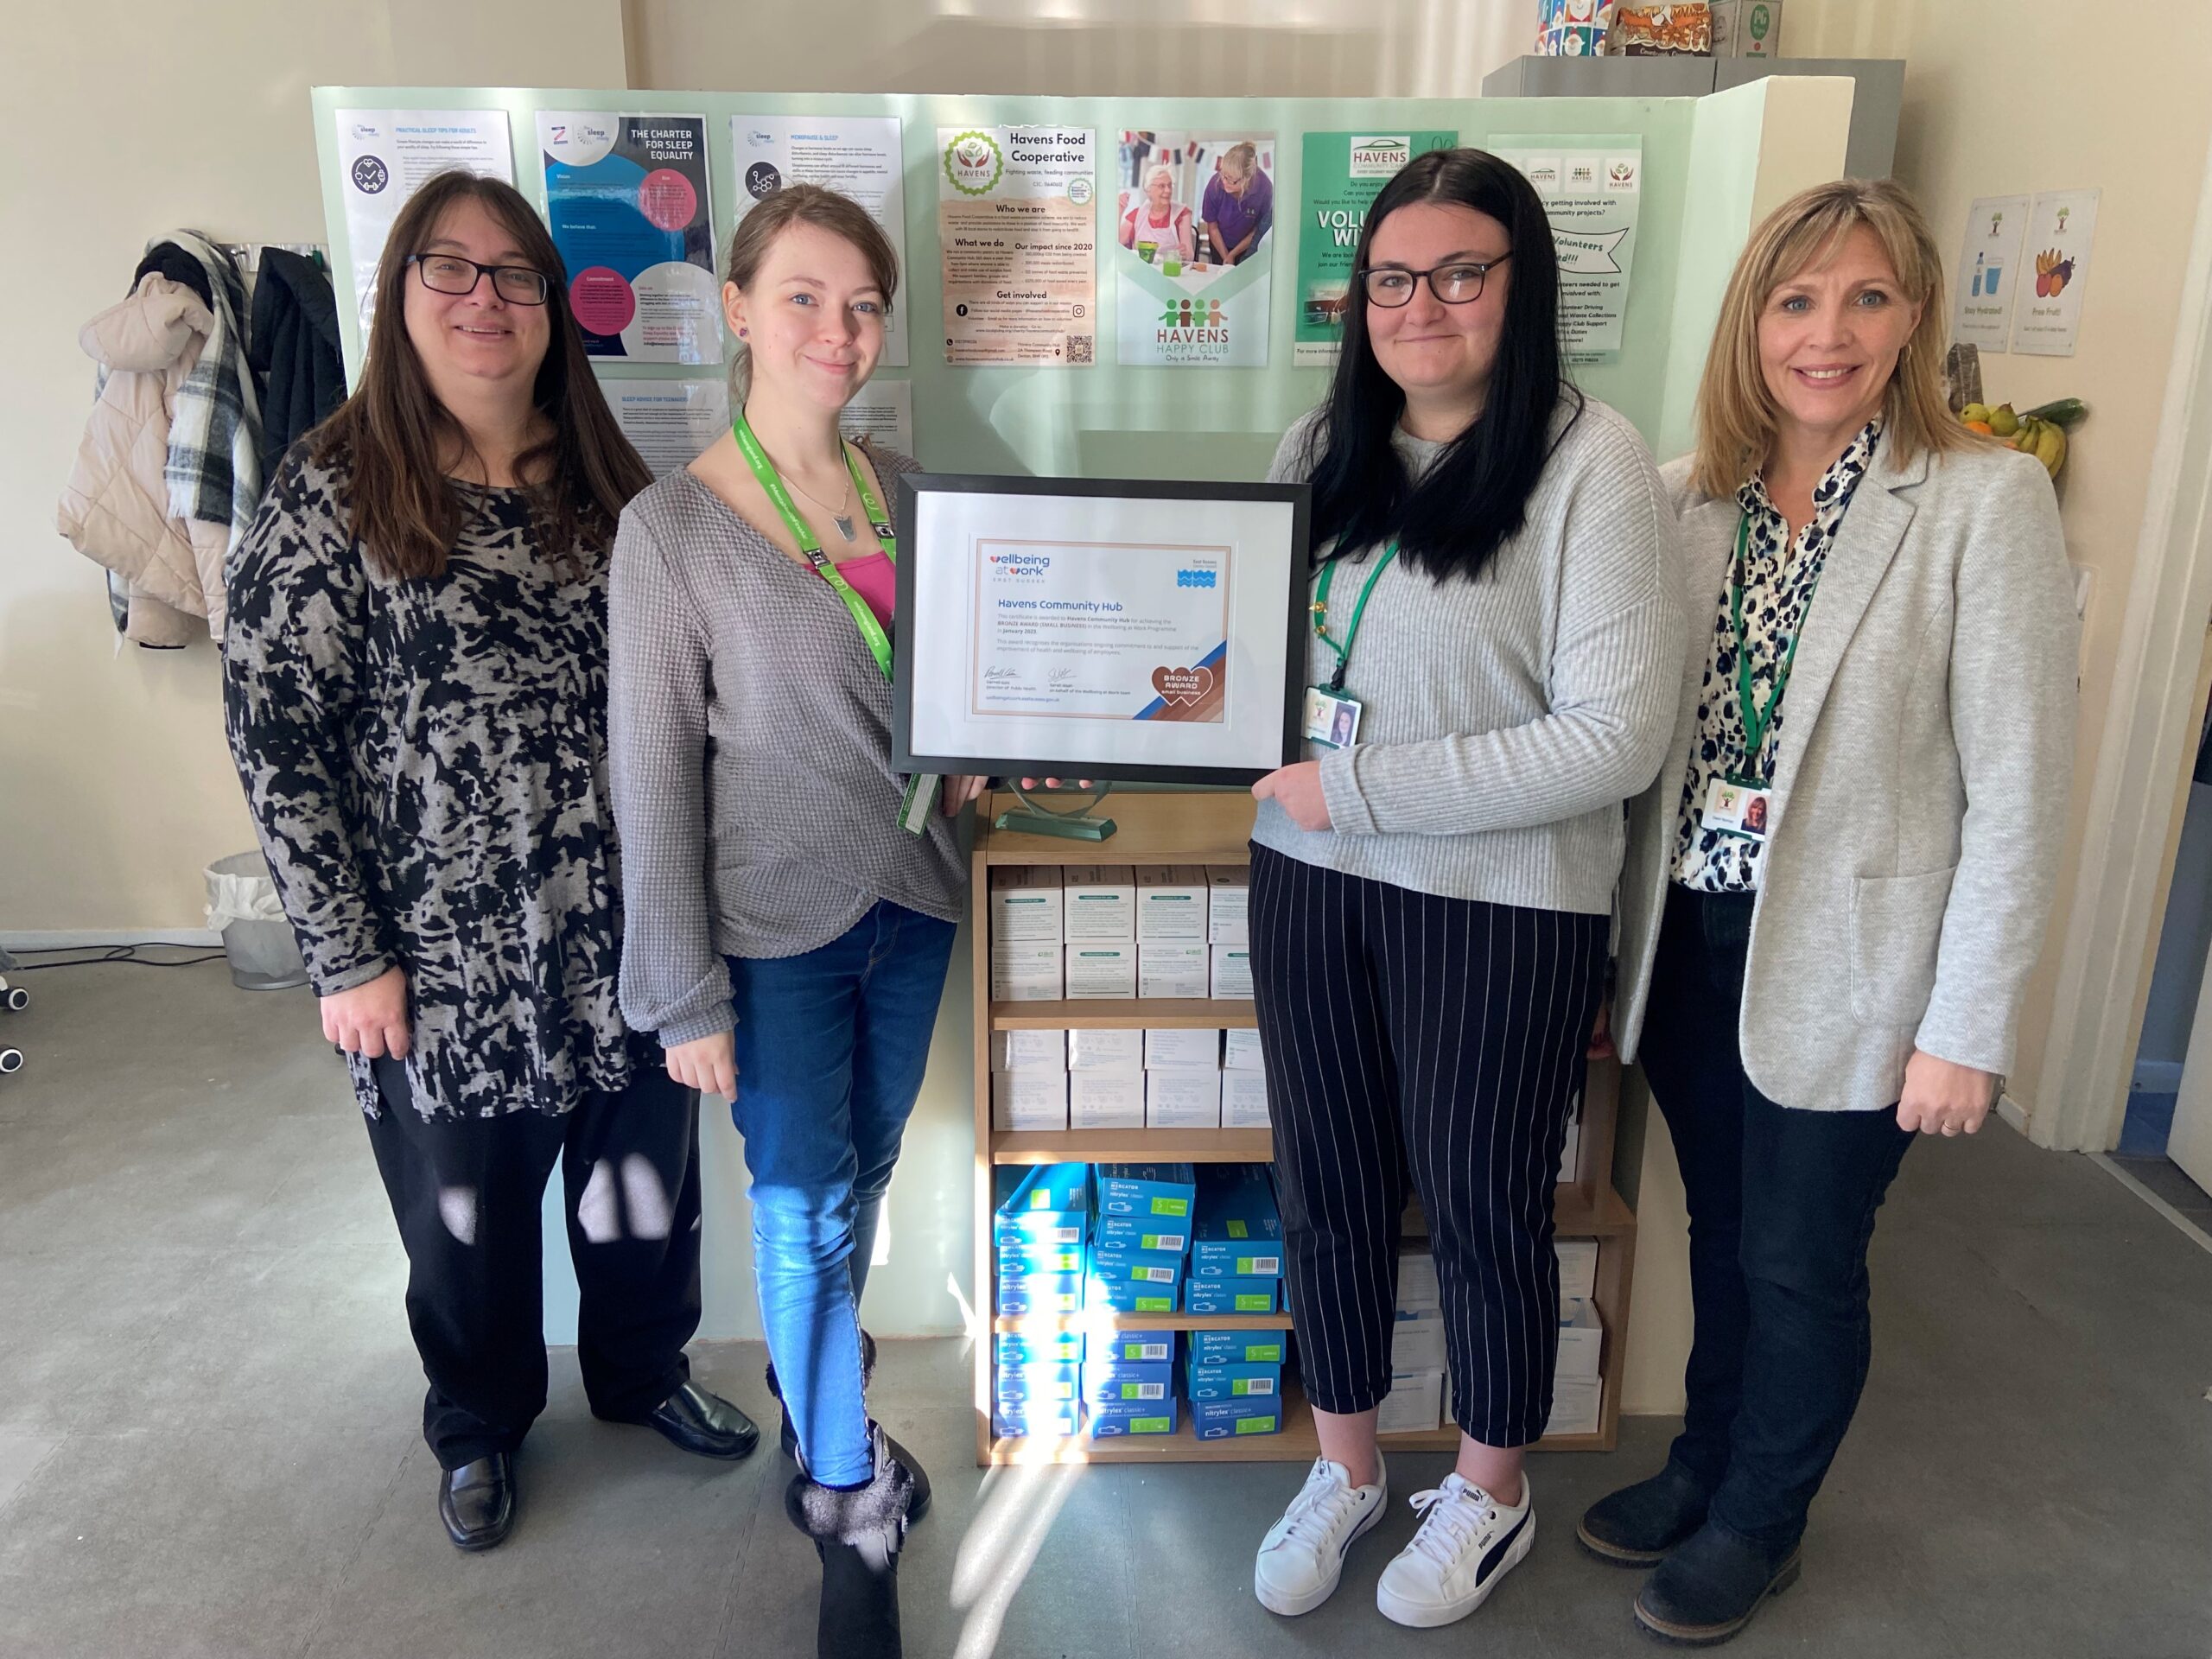 Left to Right: Paula Woolven (company secretary), Rebecca Woolven (food cooperative manager), Dani MacDonald (small projects coordinator) and Dawn Norman (community manager)